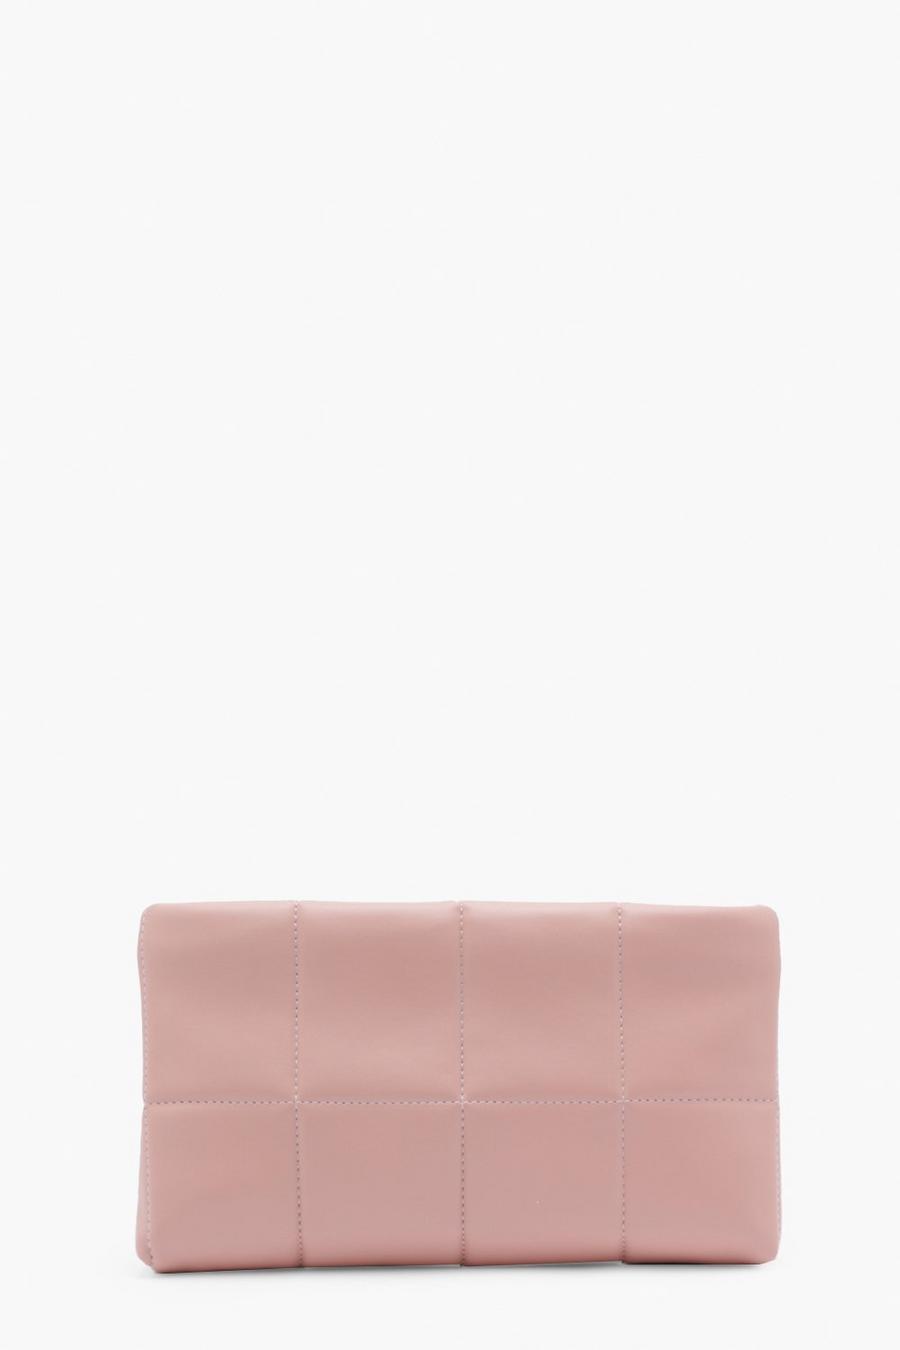 Nude Quilted Basic Clutch Bag image number 1